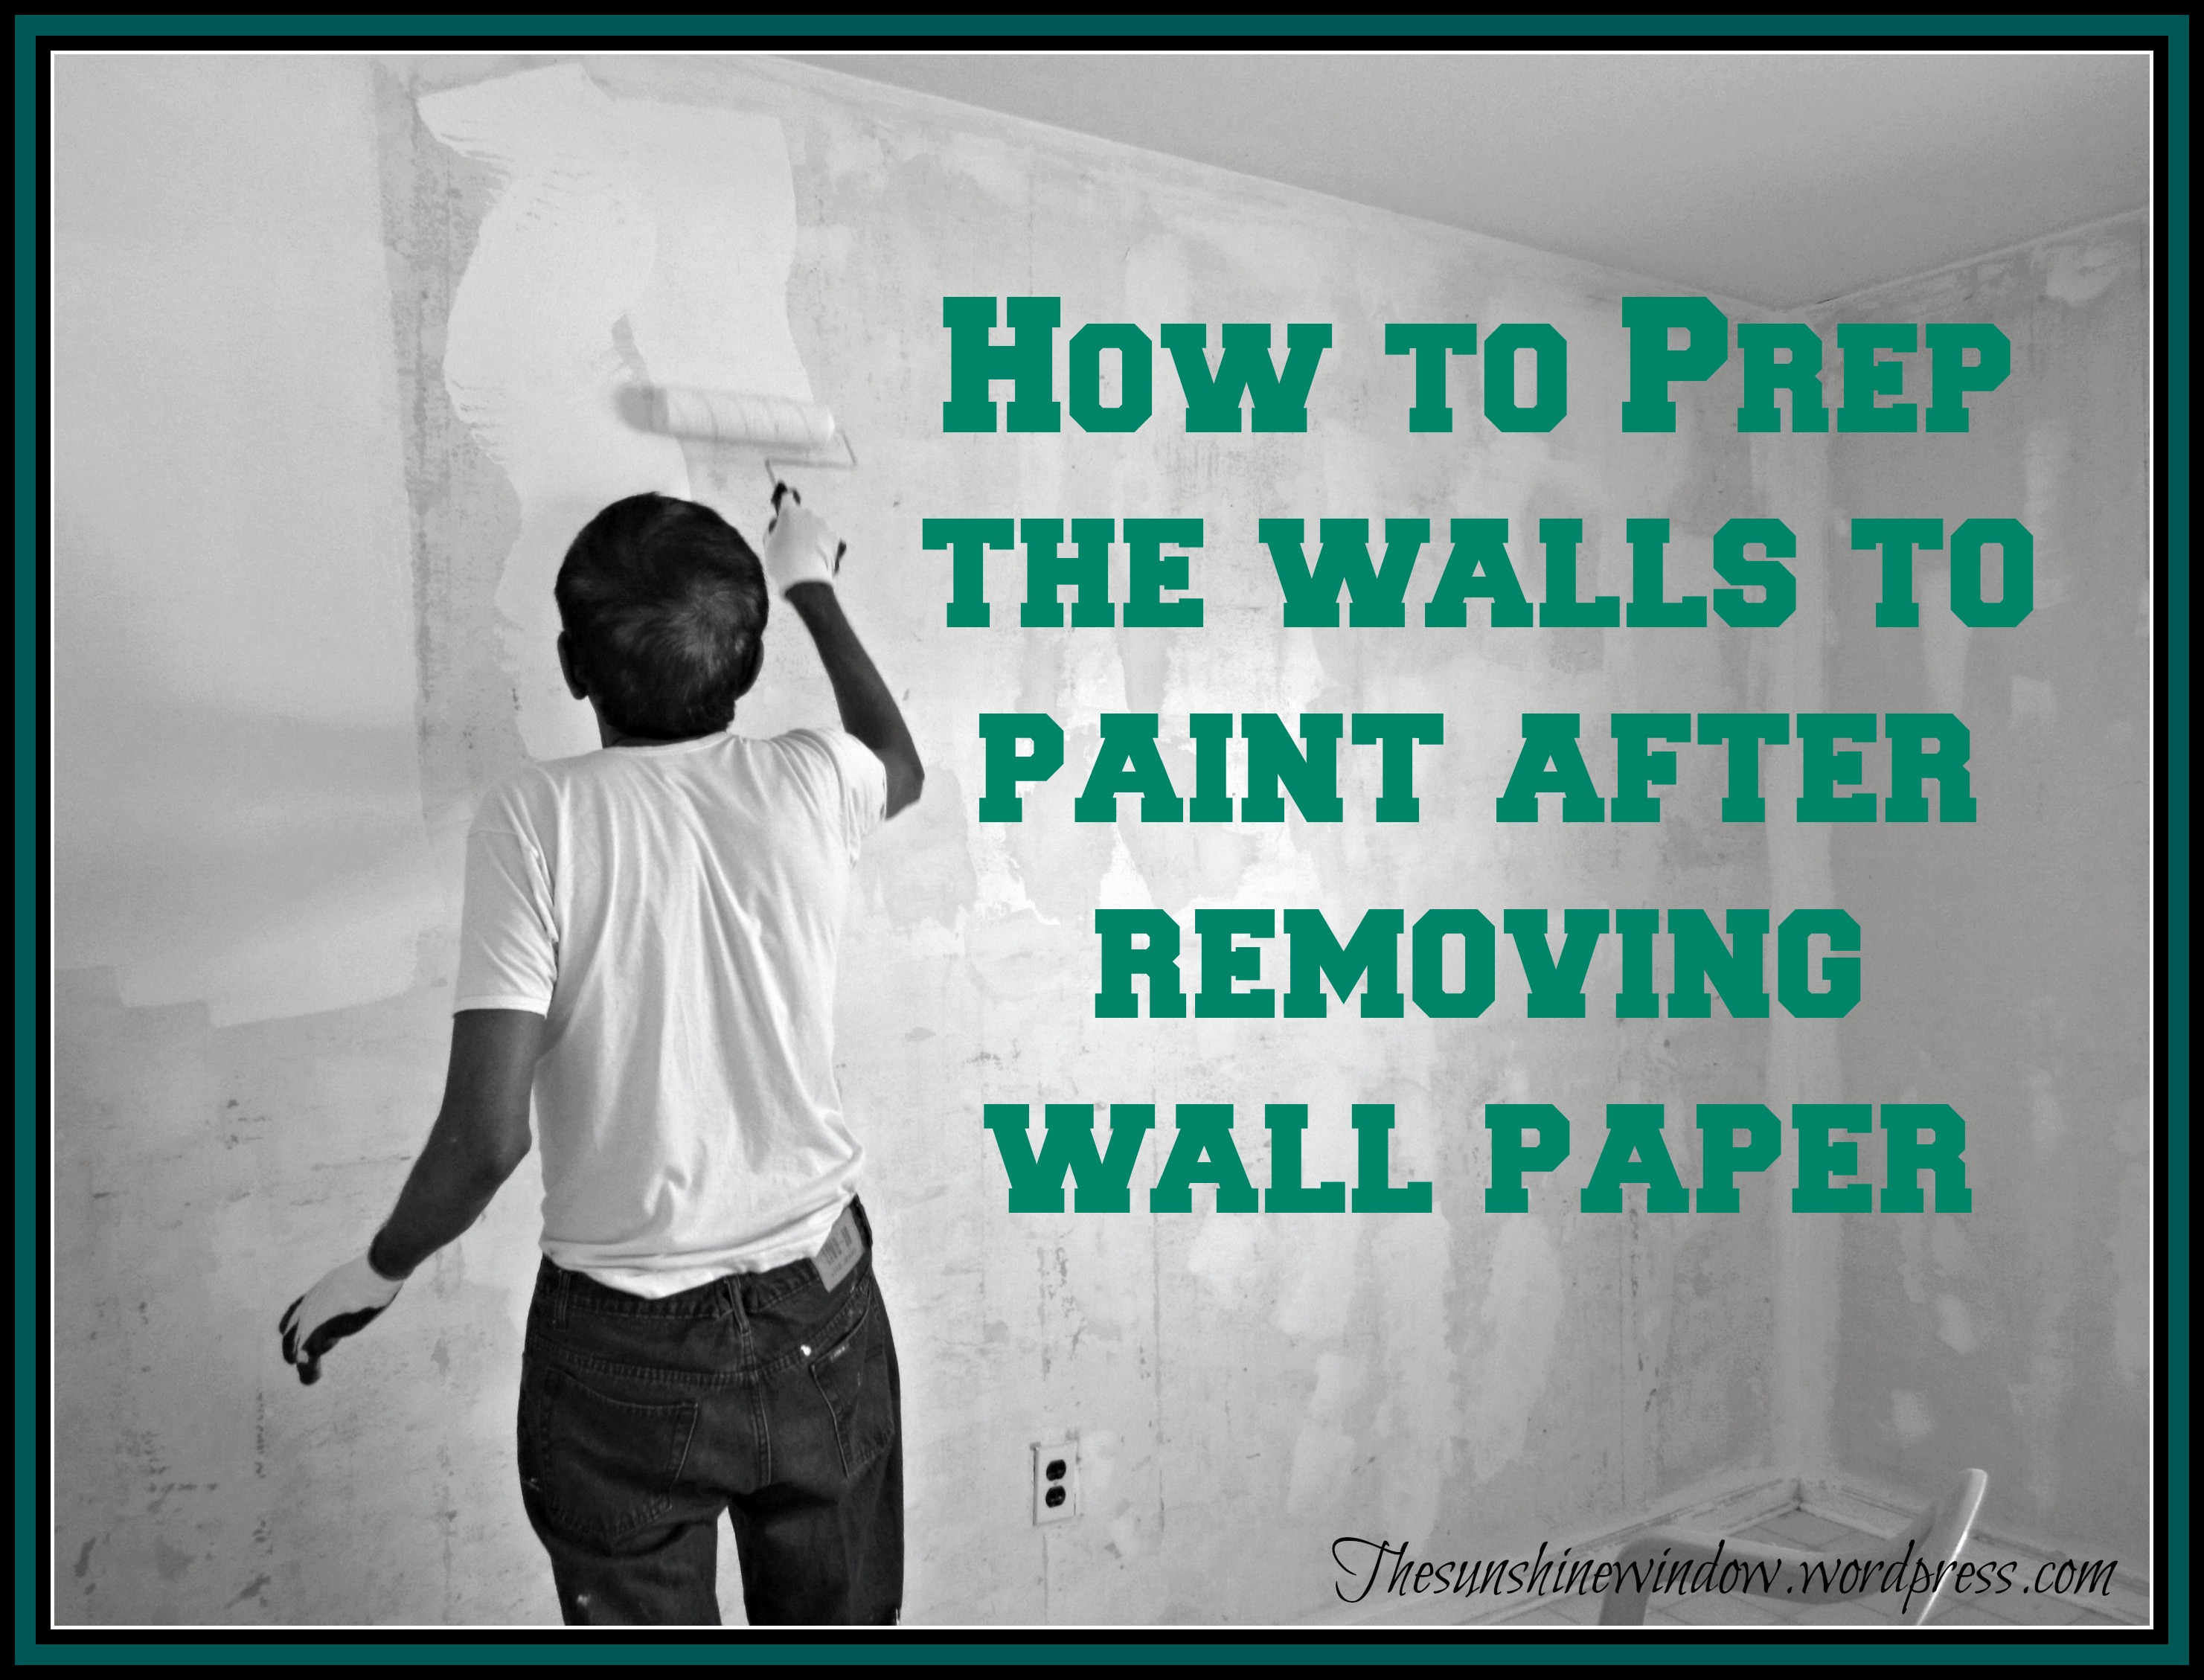 Wall Prep After Paper Removal